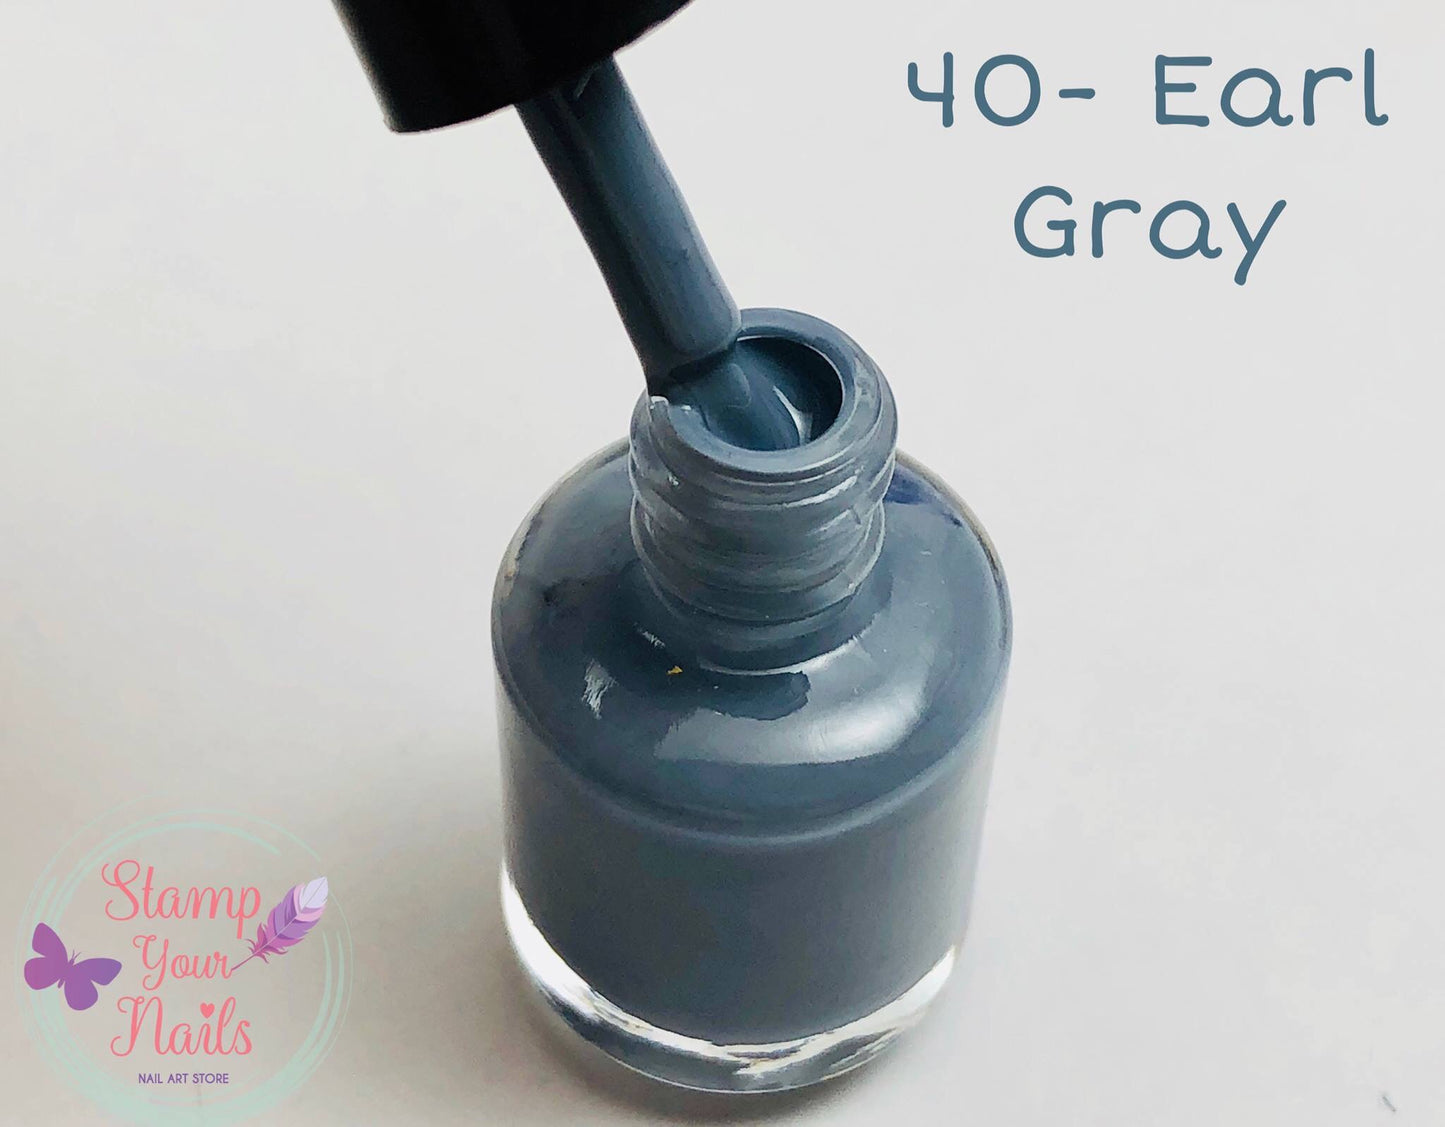 40 Earl Gray - Stamp your nails